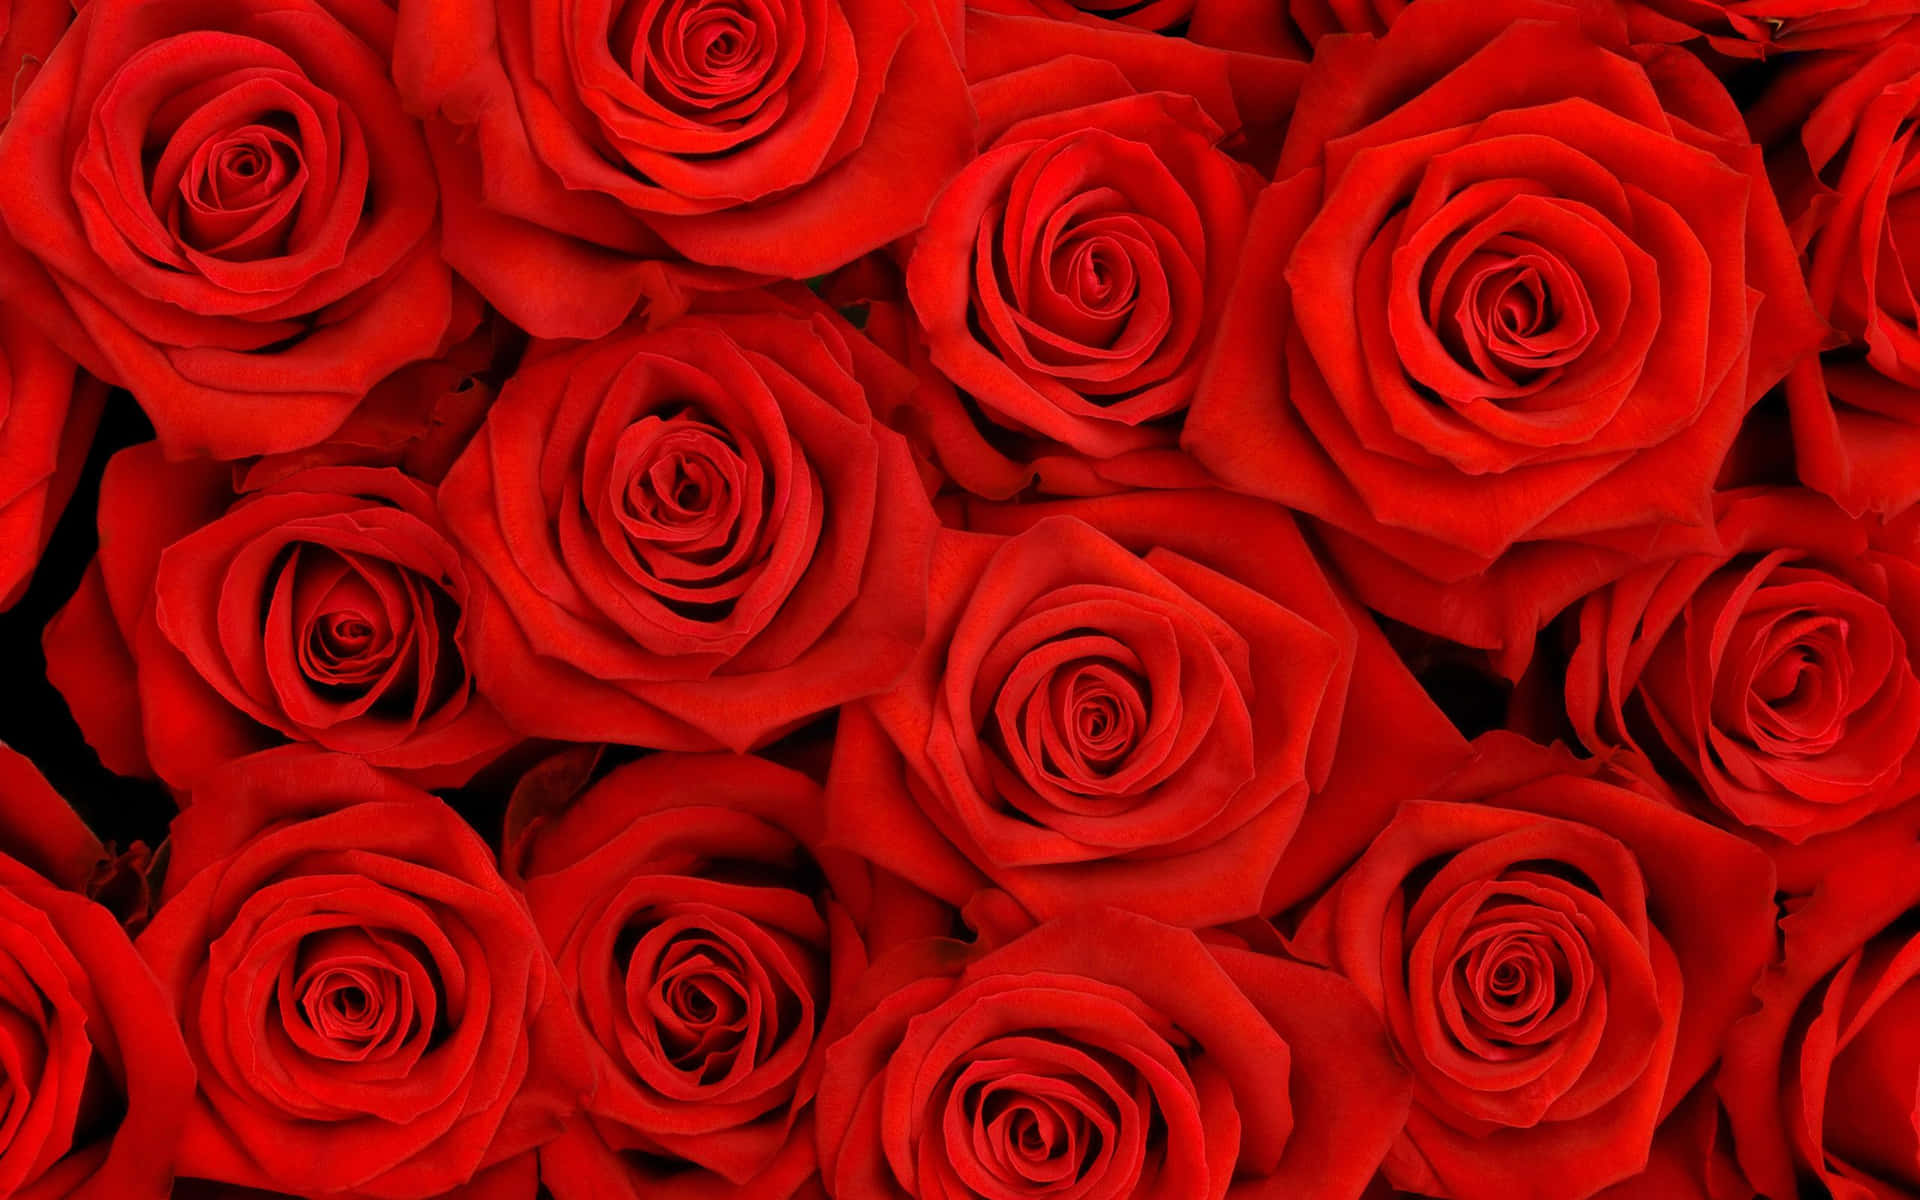 A romantic gift of love - a bright red rose